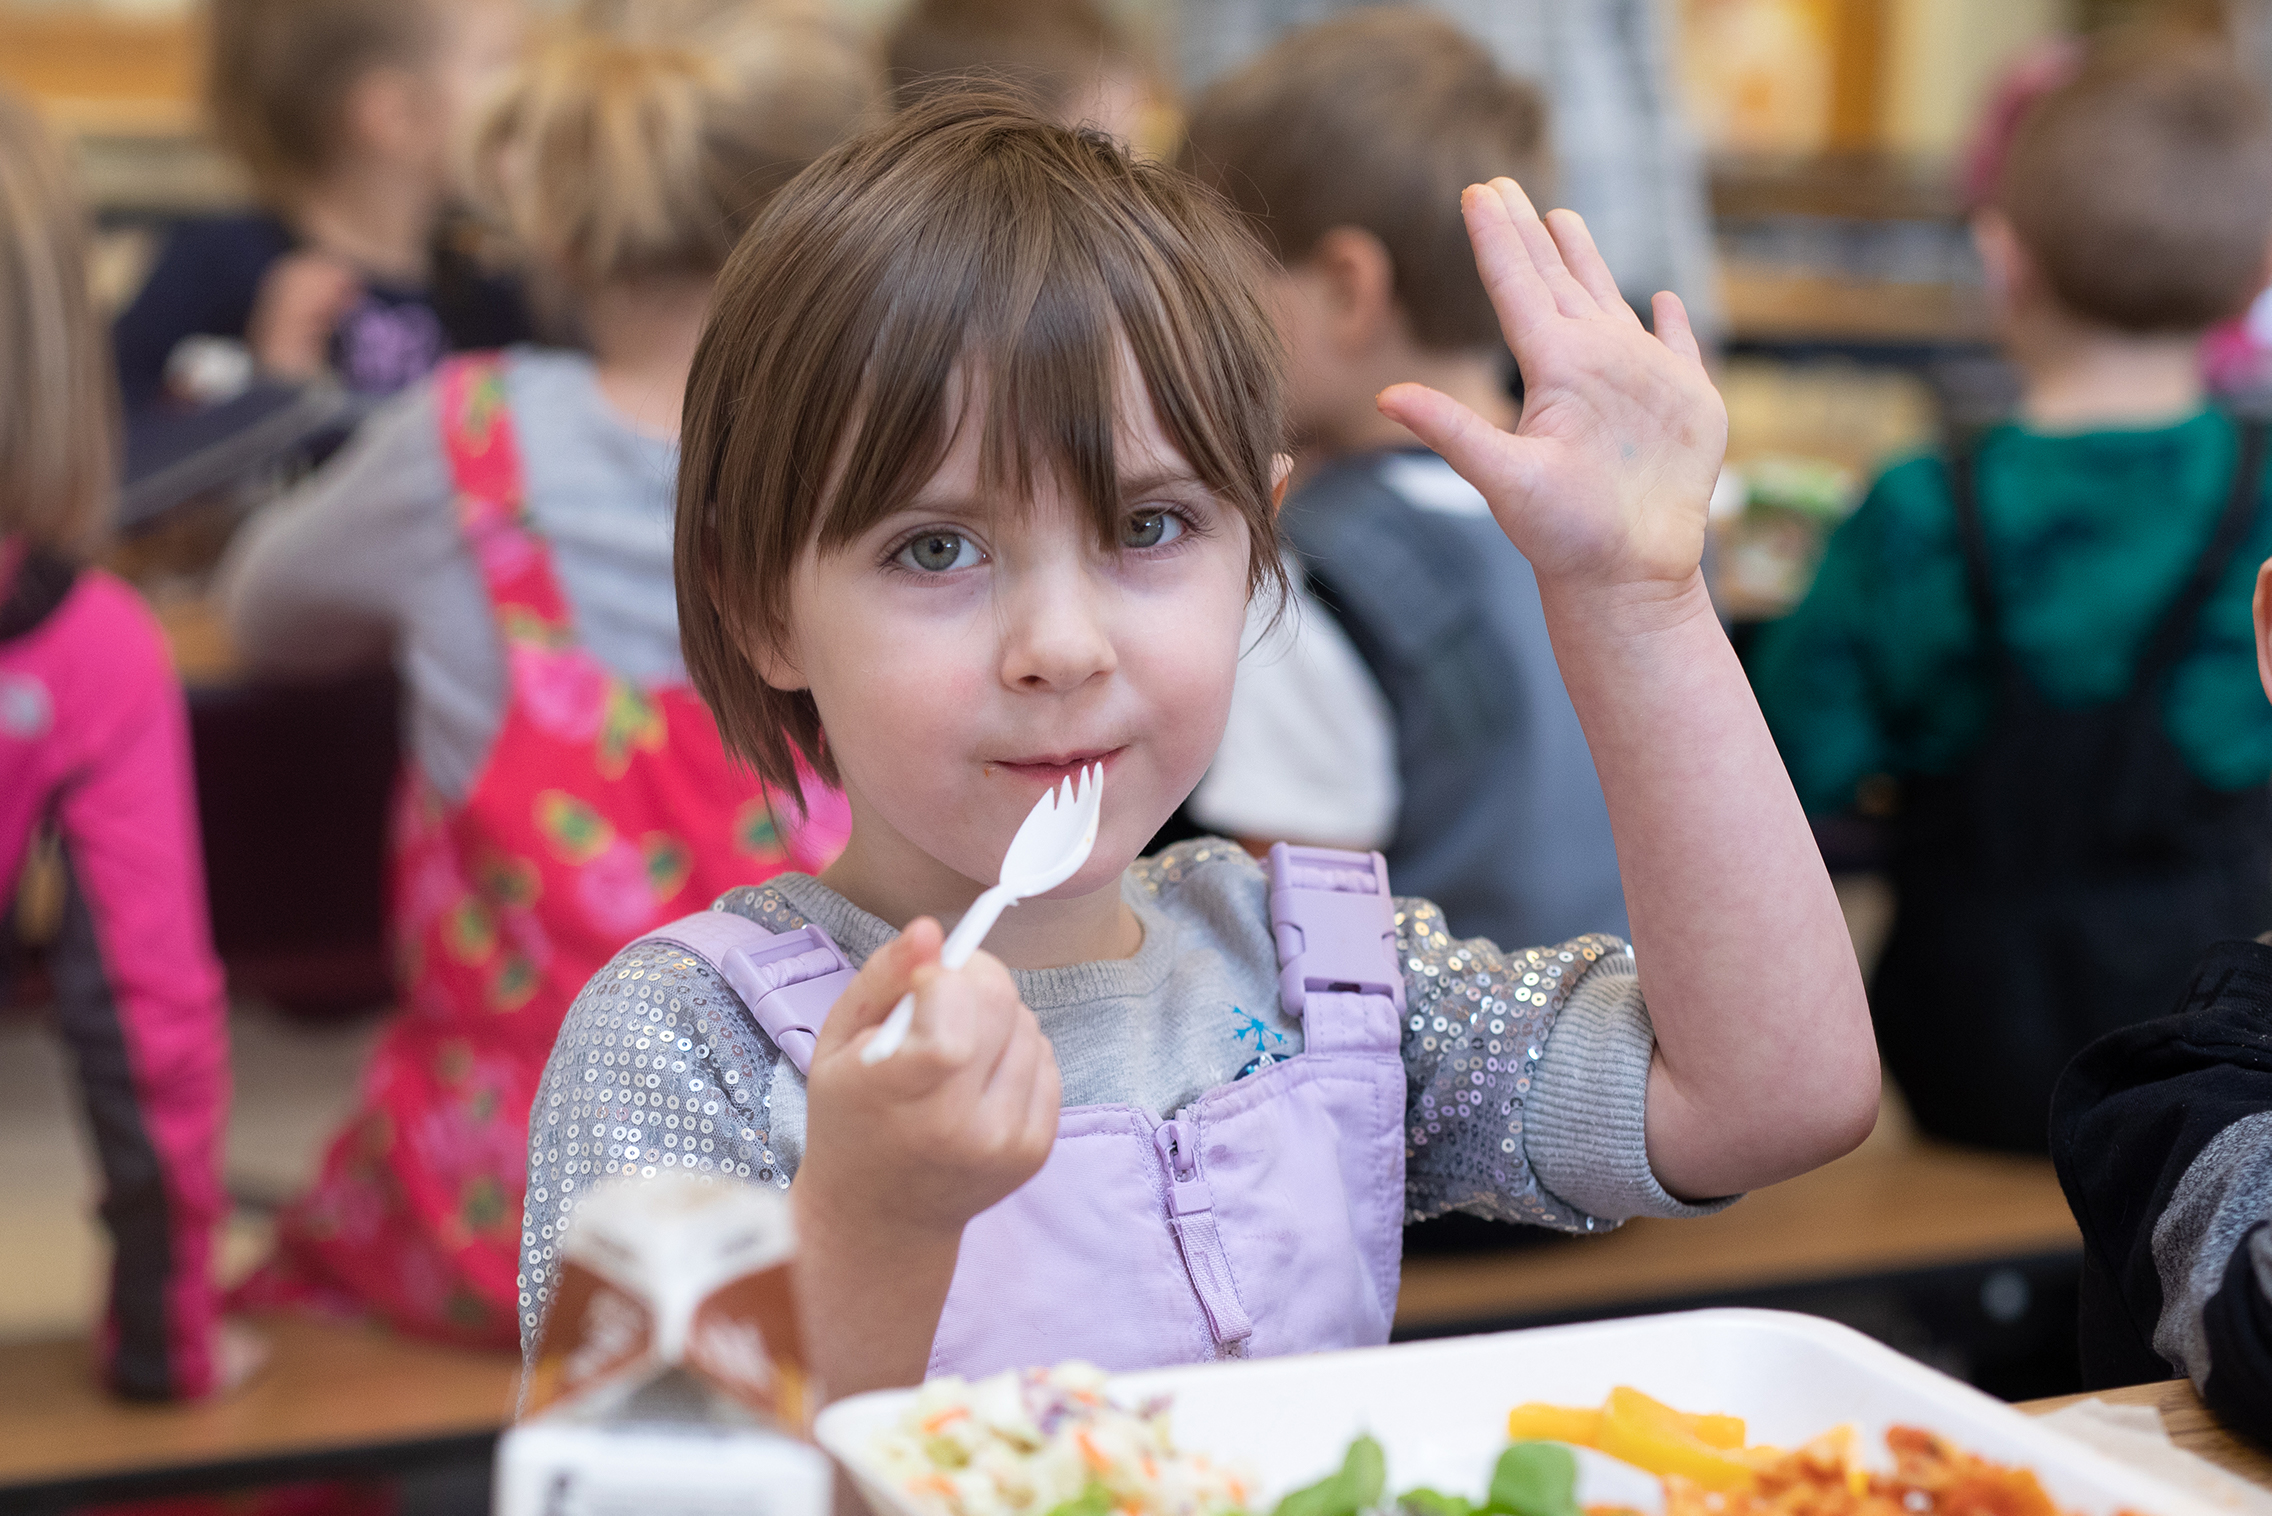 Young girl eats Michigan-grown vegetables in a school cafeteria